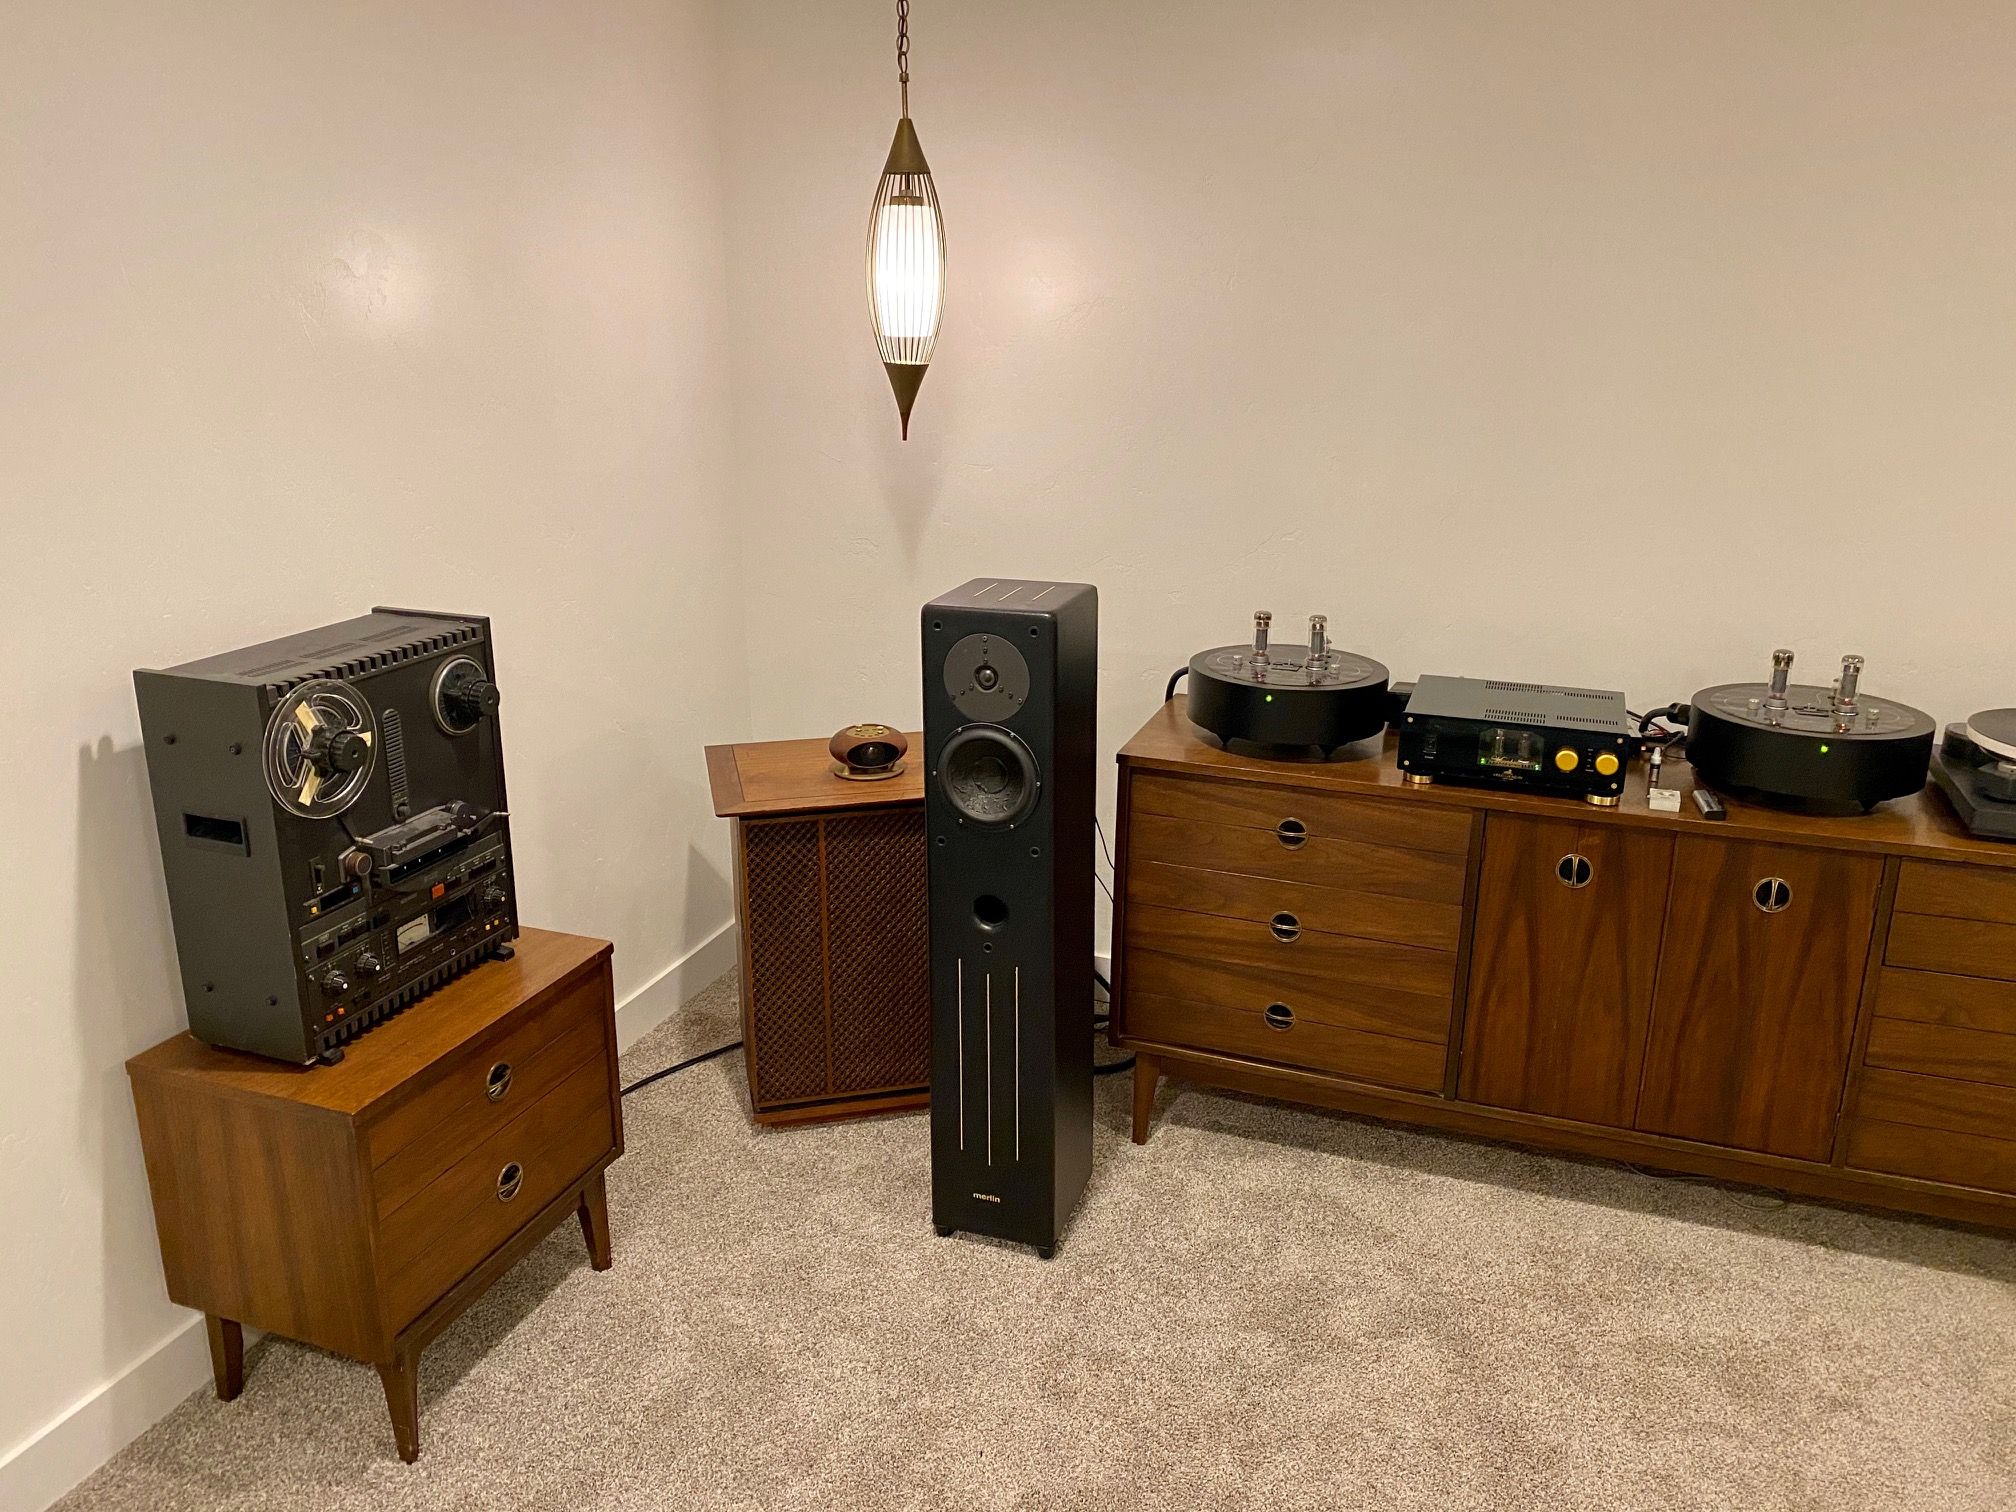 Left side of system showing the Otari reel to reel on the matching vintage end table